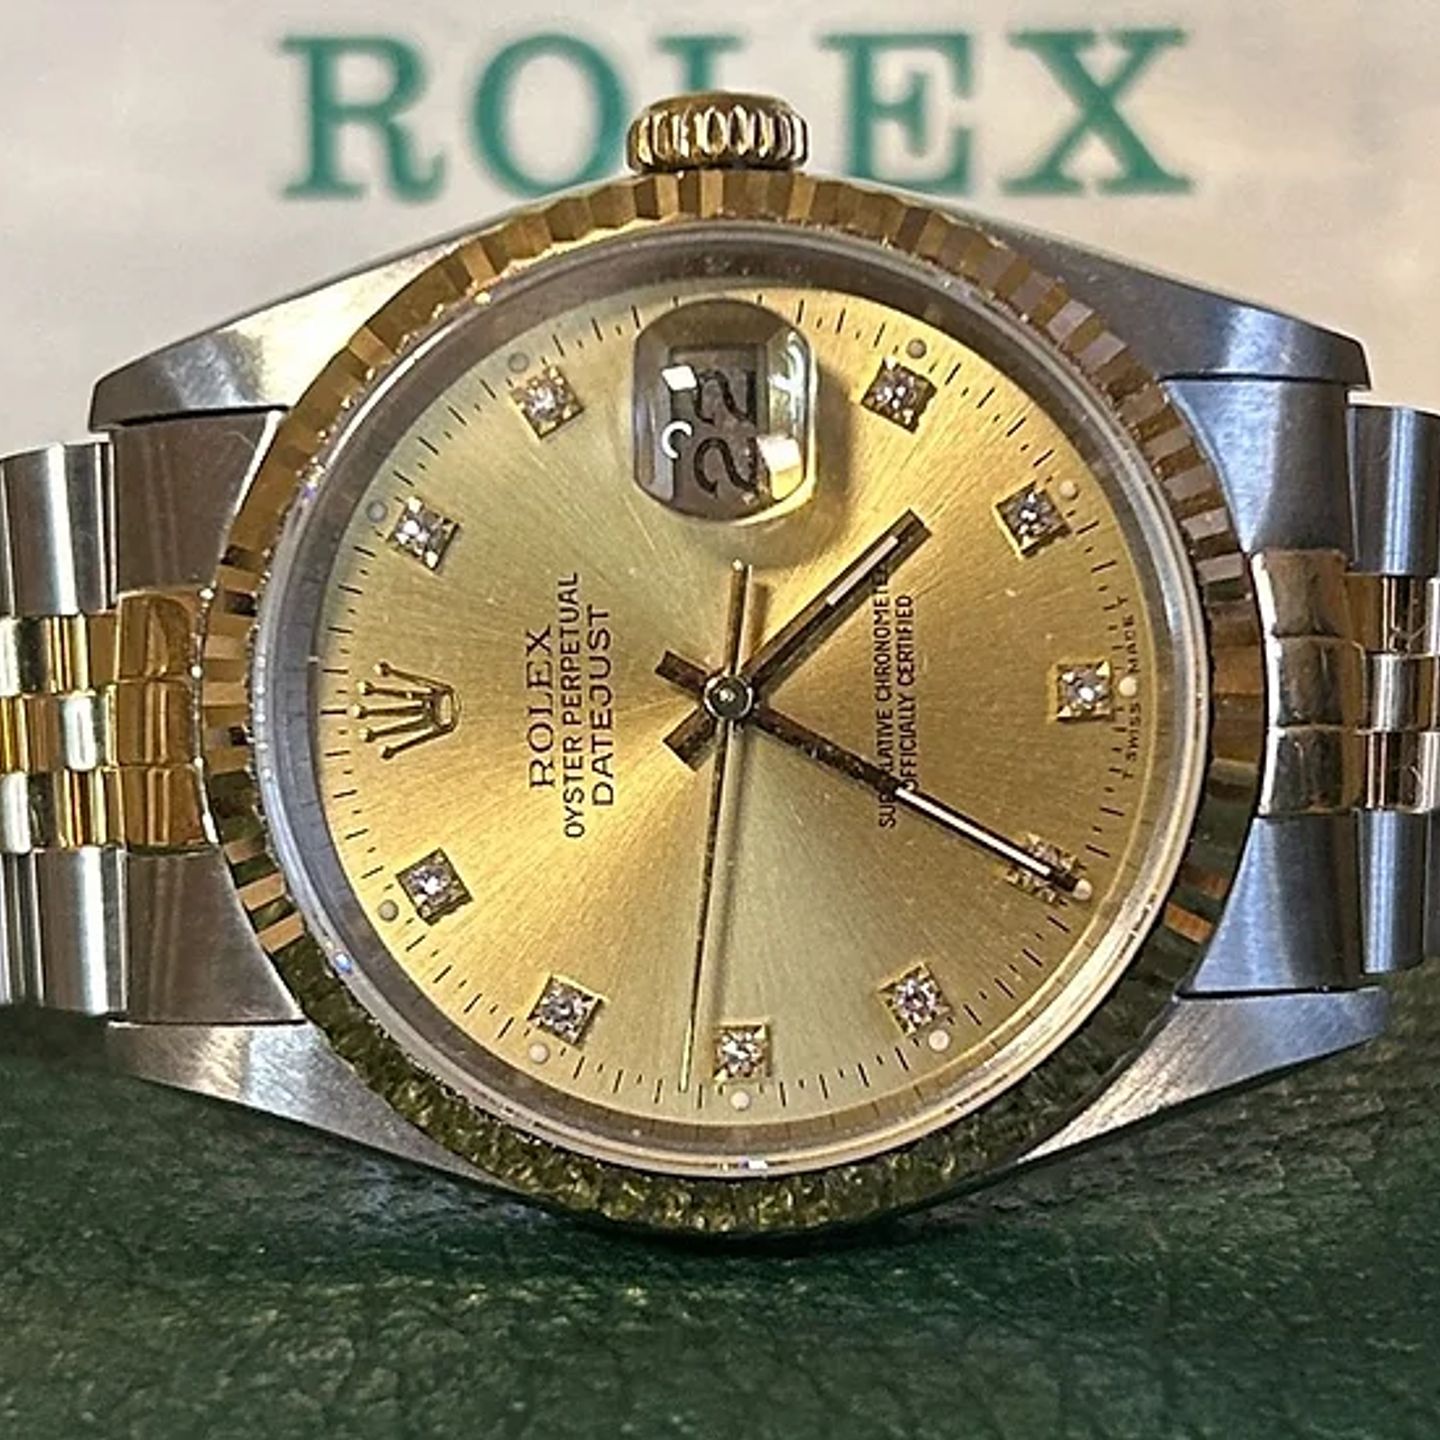 Rolex Datejust 36 16233 (1991) - Champagne dial 36 mm Gold/Steel case (1/6)